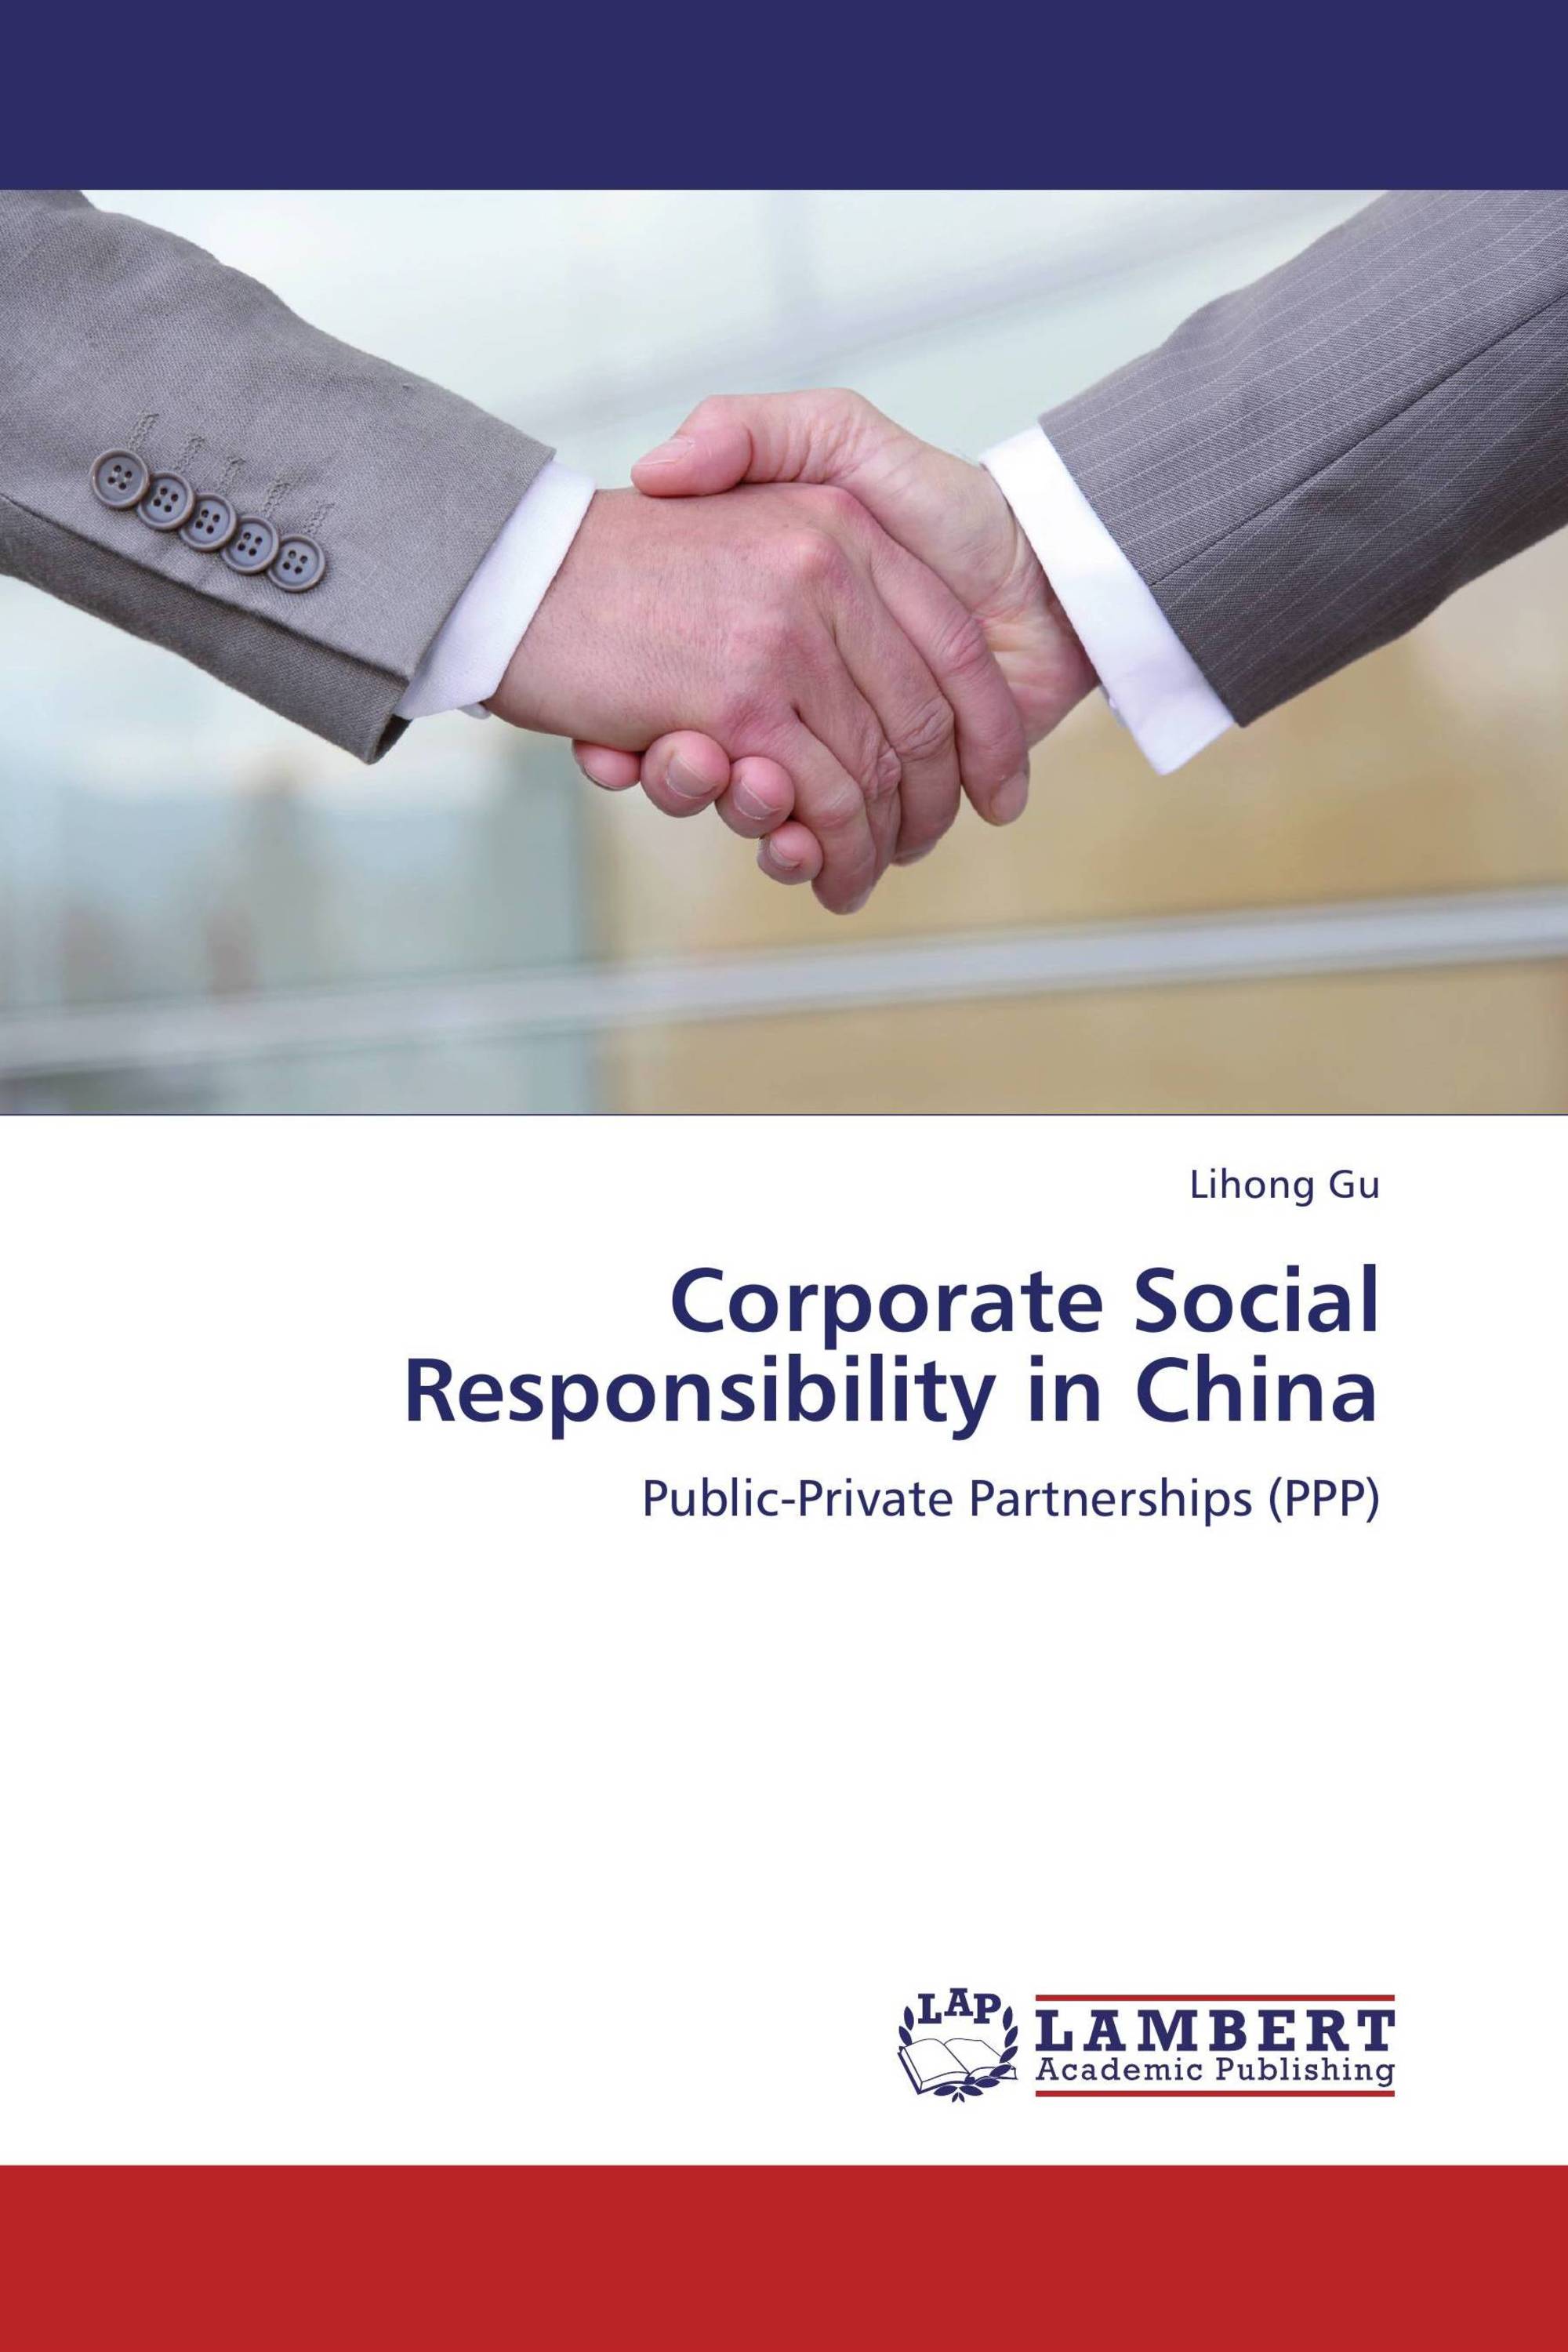 Phd thesis on corporate social responsibility